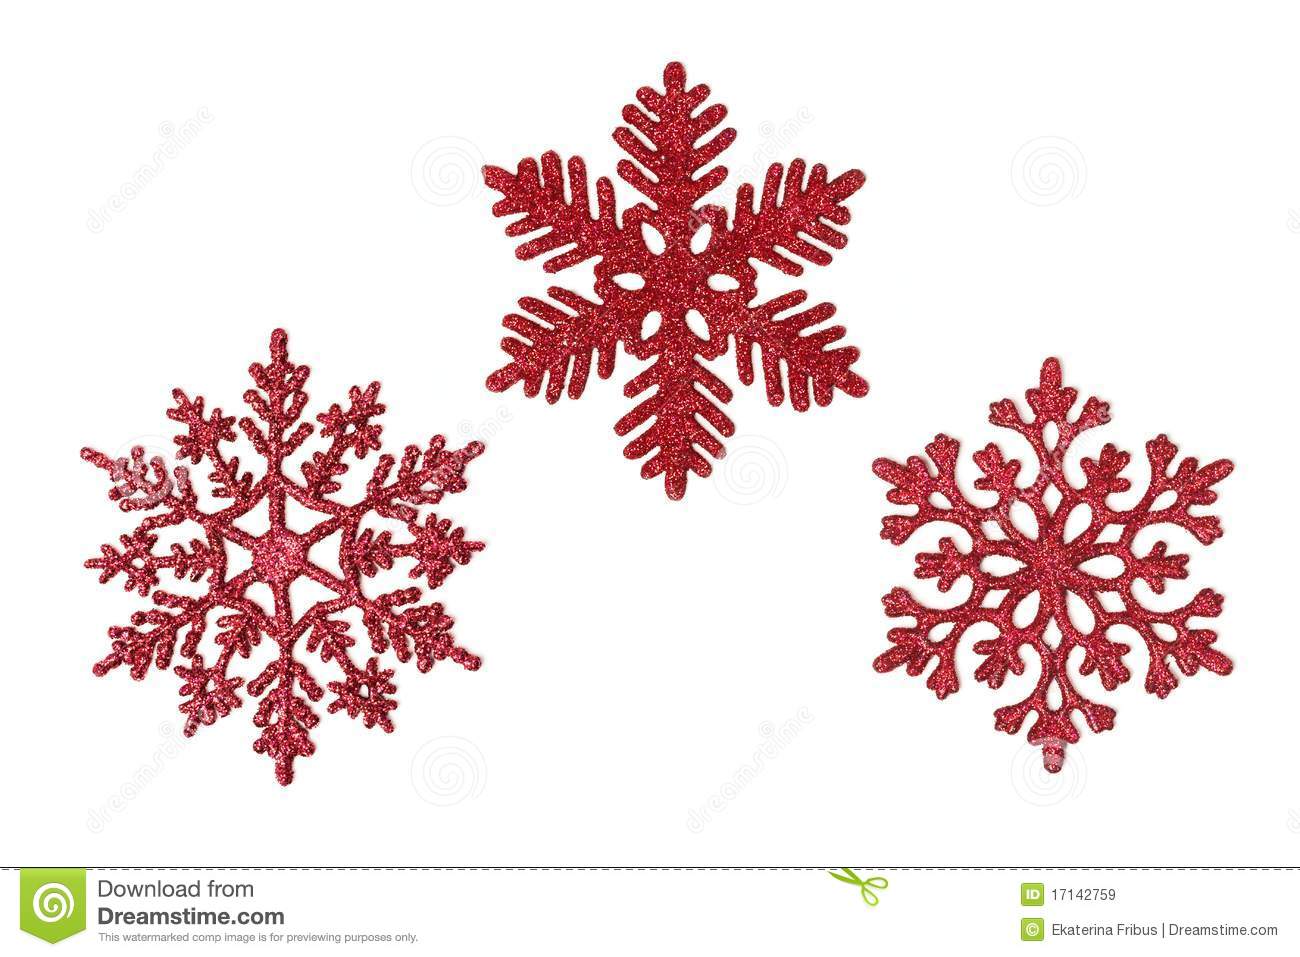 Three Red Glitter Snowflakes Royalty Free Stock Images   Image    